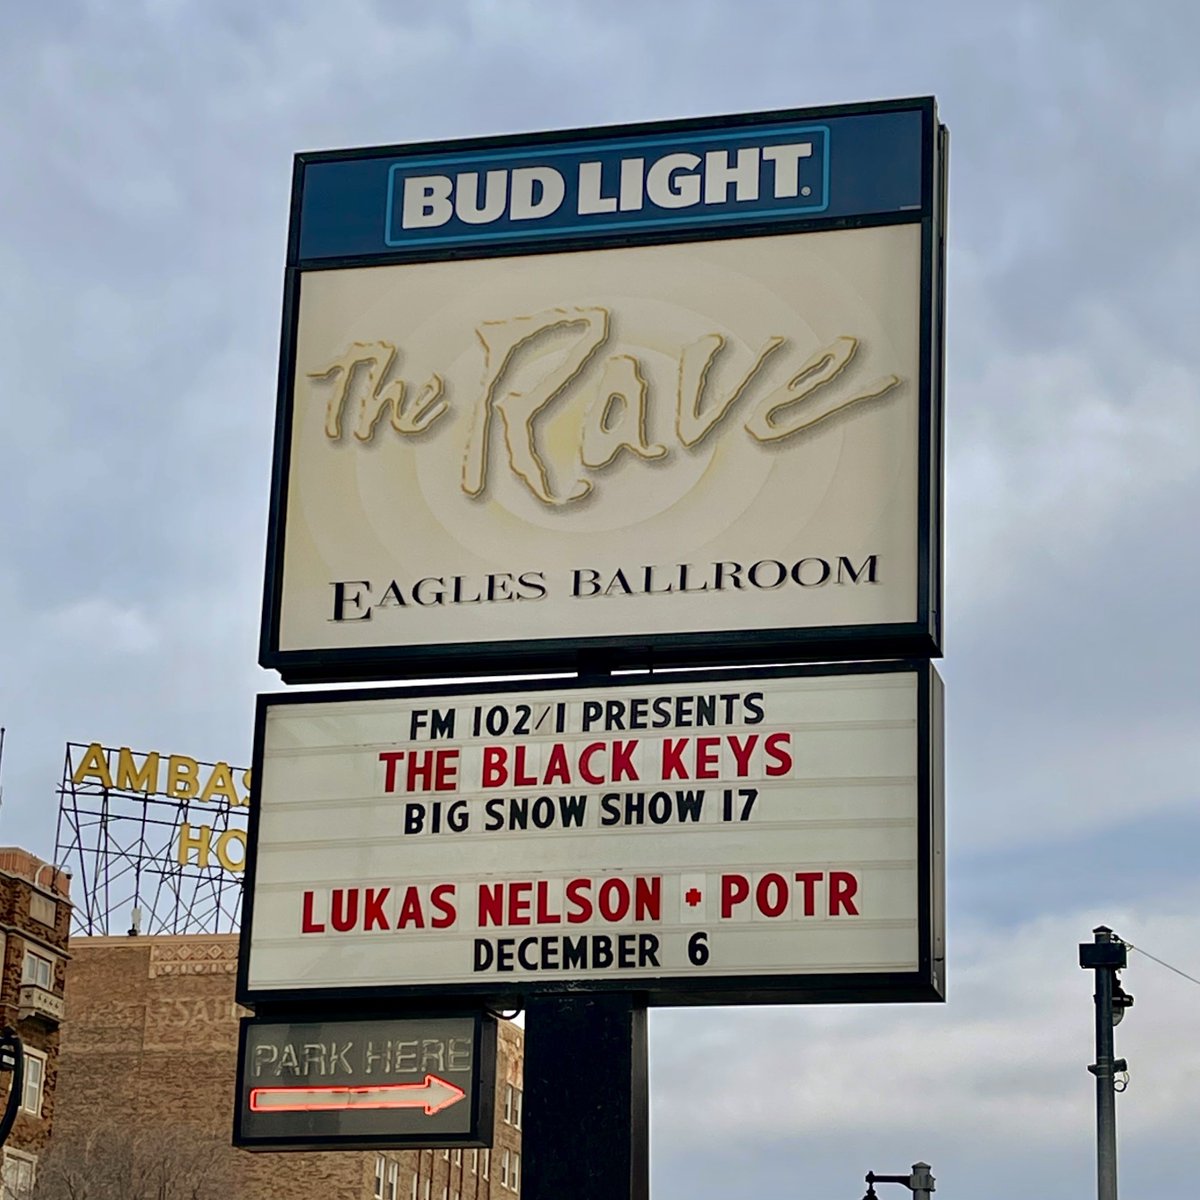 TONIGHT at The Rave / Eagles Club! 🎶 @theblackkeys headline Night 1 of @FM1021's Big Snow Show 17 w/ @ColonyHouse! ❄️ @lukasnelson + POTR returns to The Rave w/ @megmcree! 🤠 Both shows start at 8PM! Tickets available at the door & online » TheRave.com 📲